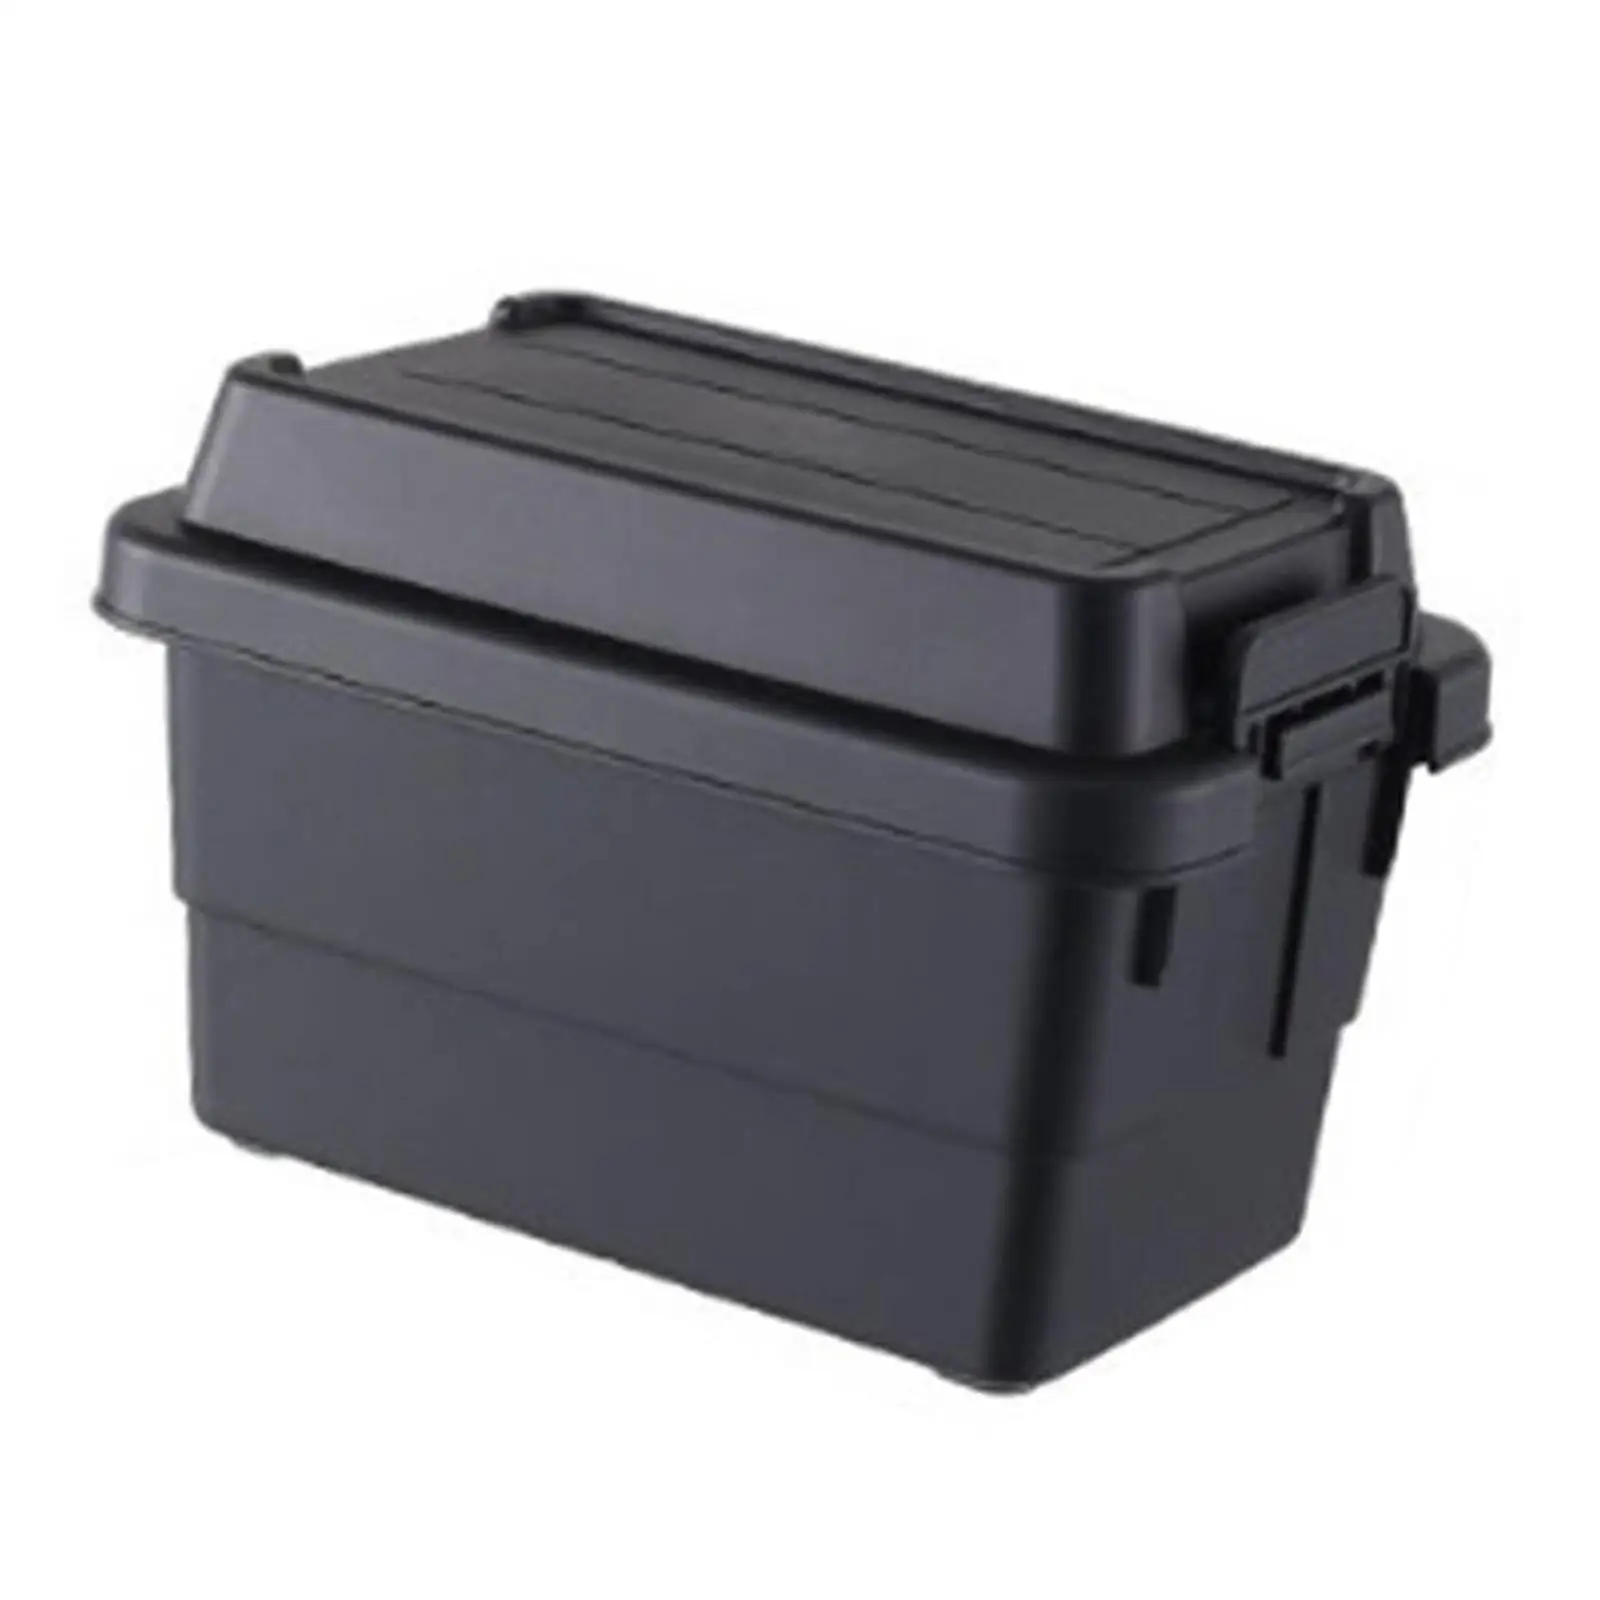 Camping Storage Box Multifunctional Portable Storage Trunk Lockable for Barbecue